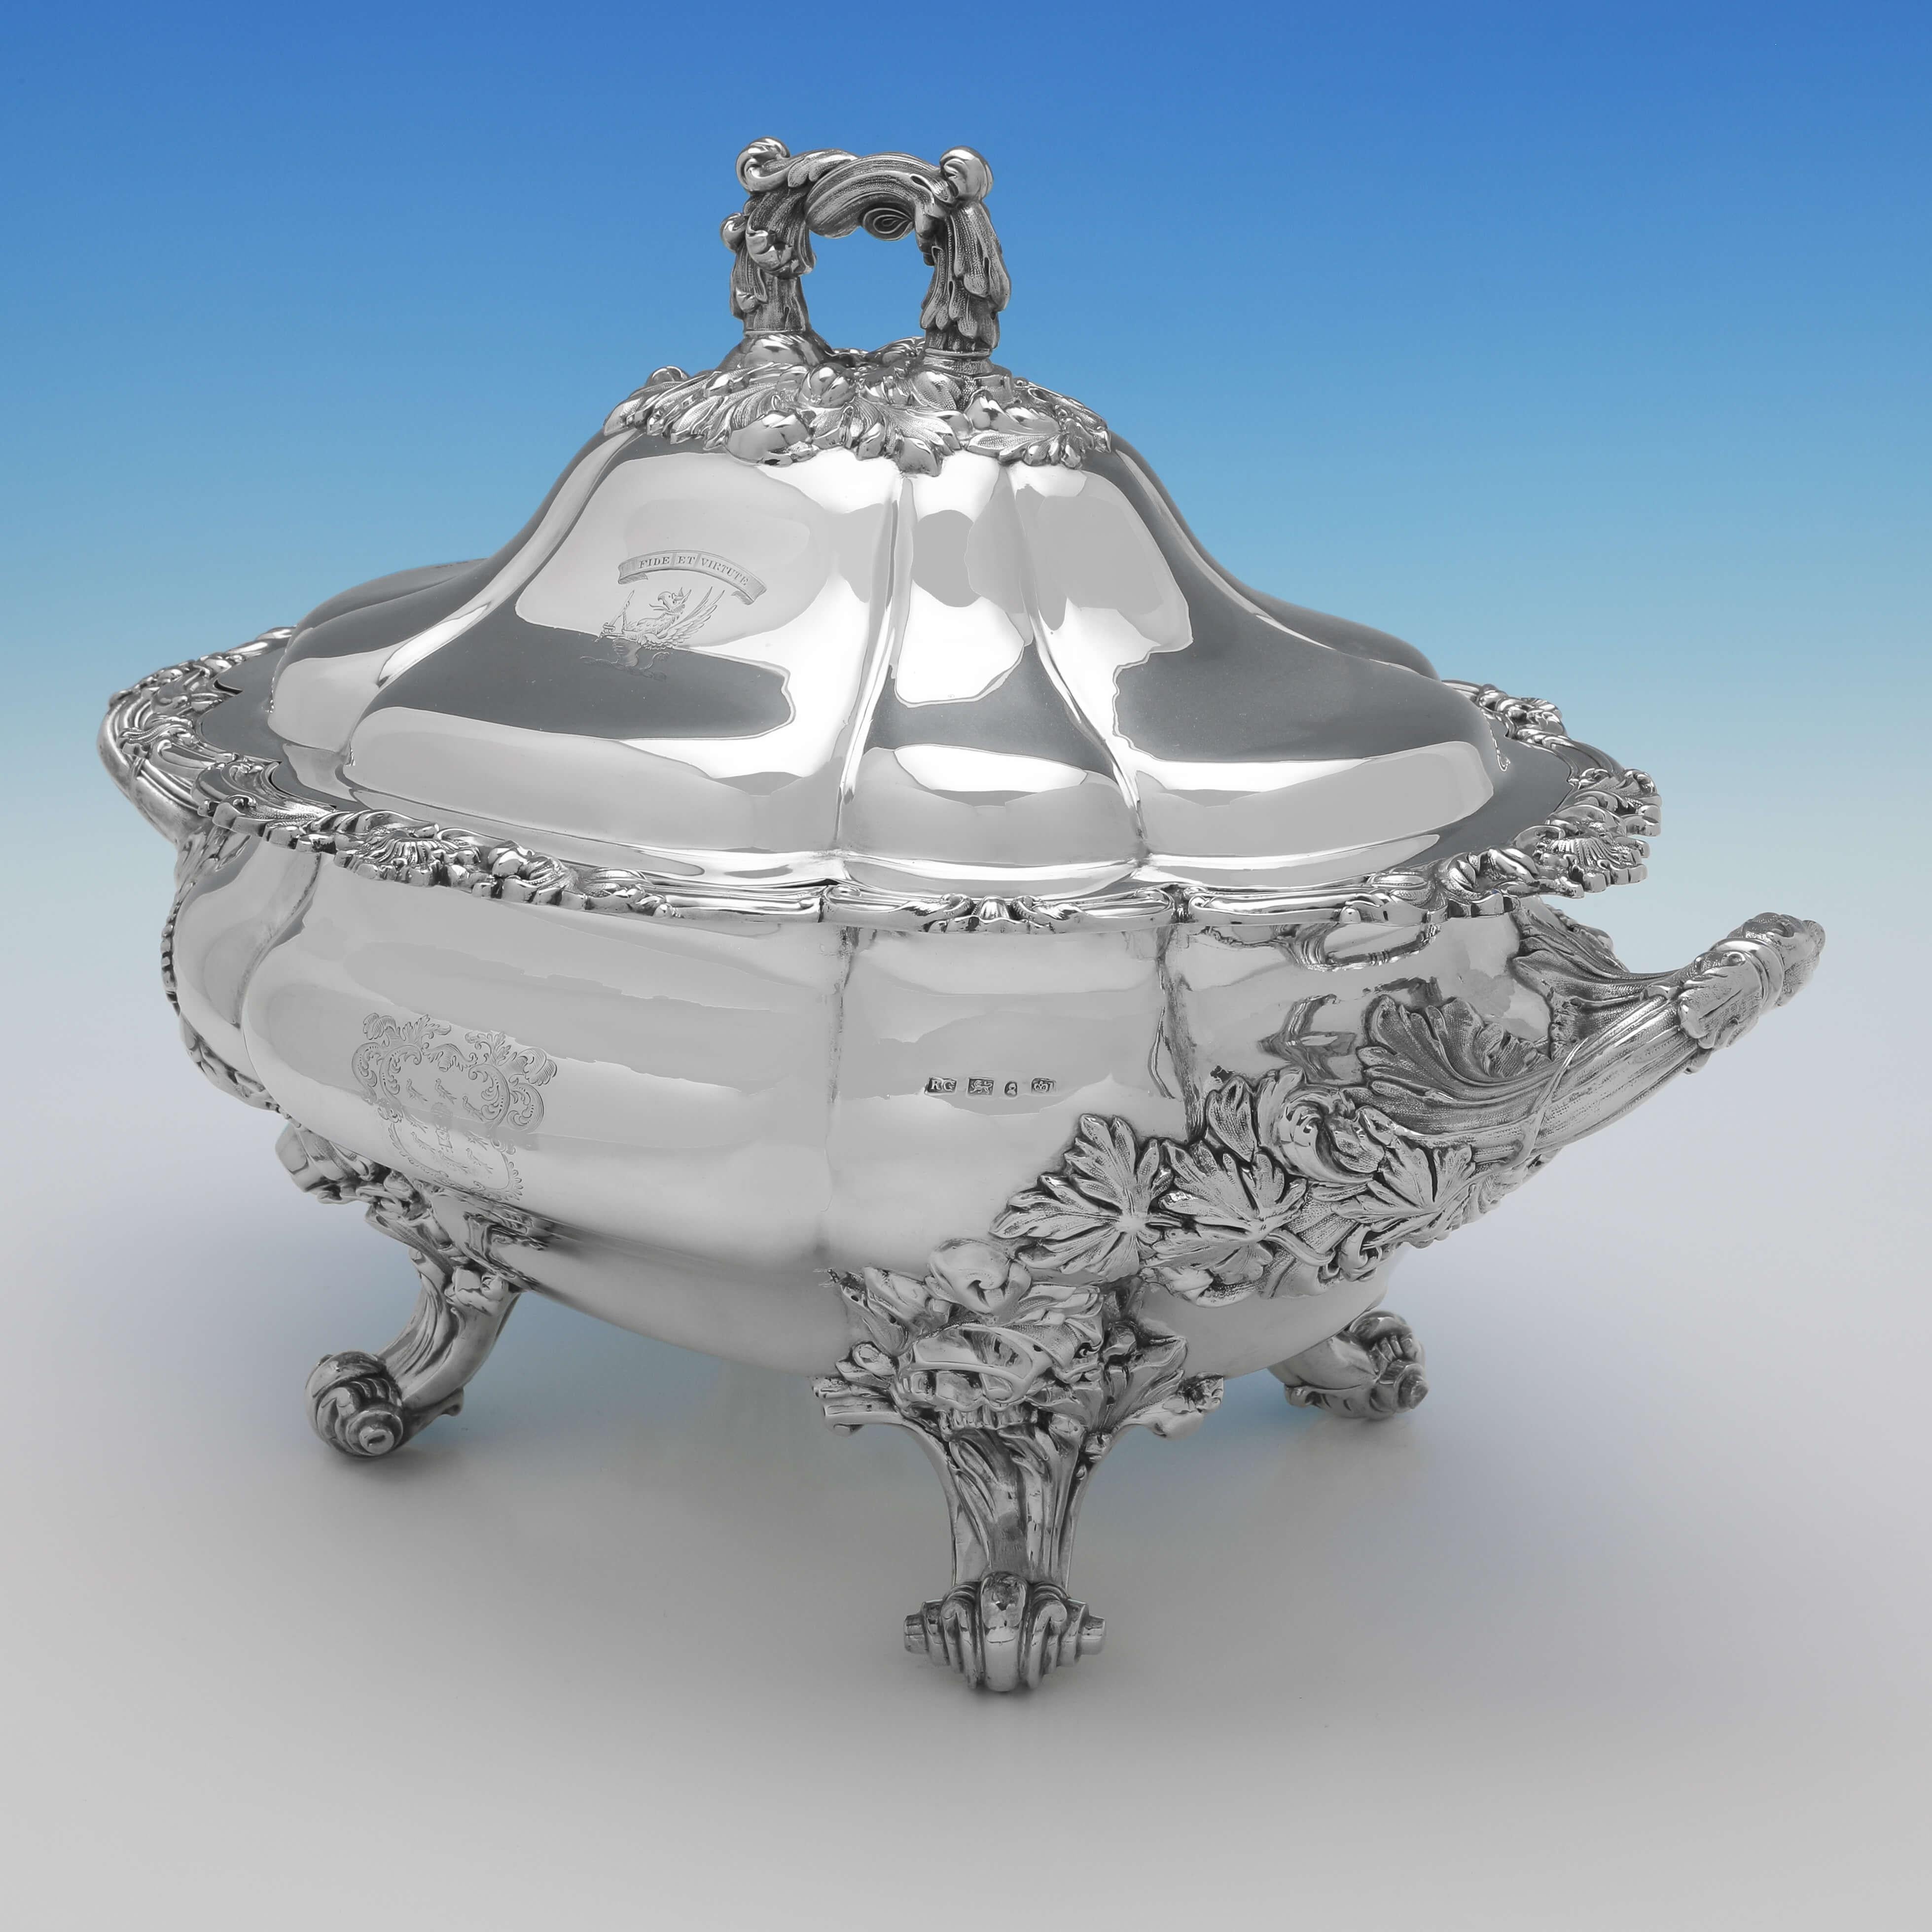 Hallmarked in Sheffield in 1833 by Robert Gainsford, this striking, Antique Sterling Silver Soup Tureen, is in the Regency taste, featuring ornate cast feet and handles, and heraldic engraving. 

The soup tureen measures 12.25